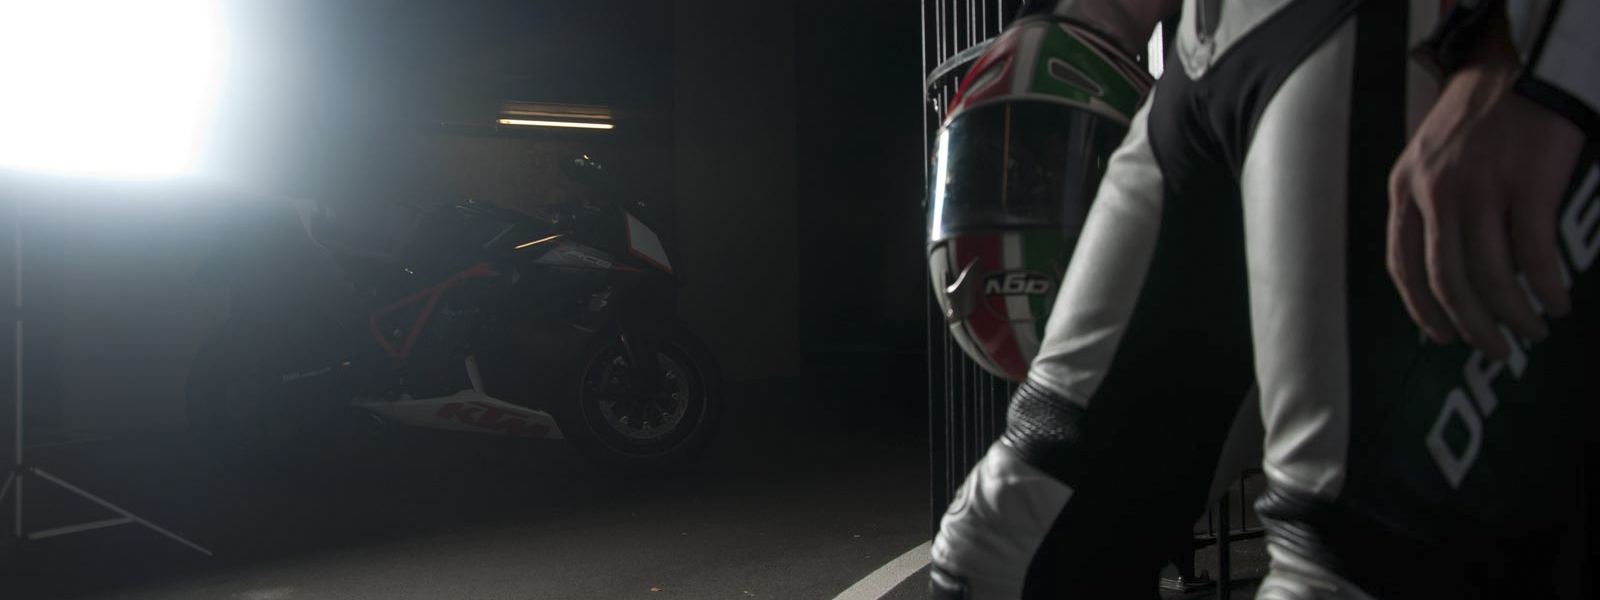 Behind the Scenes| KTM RC8R Photoshoot